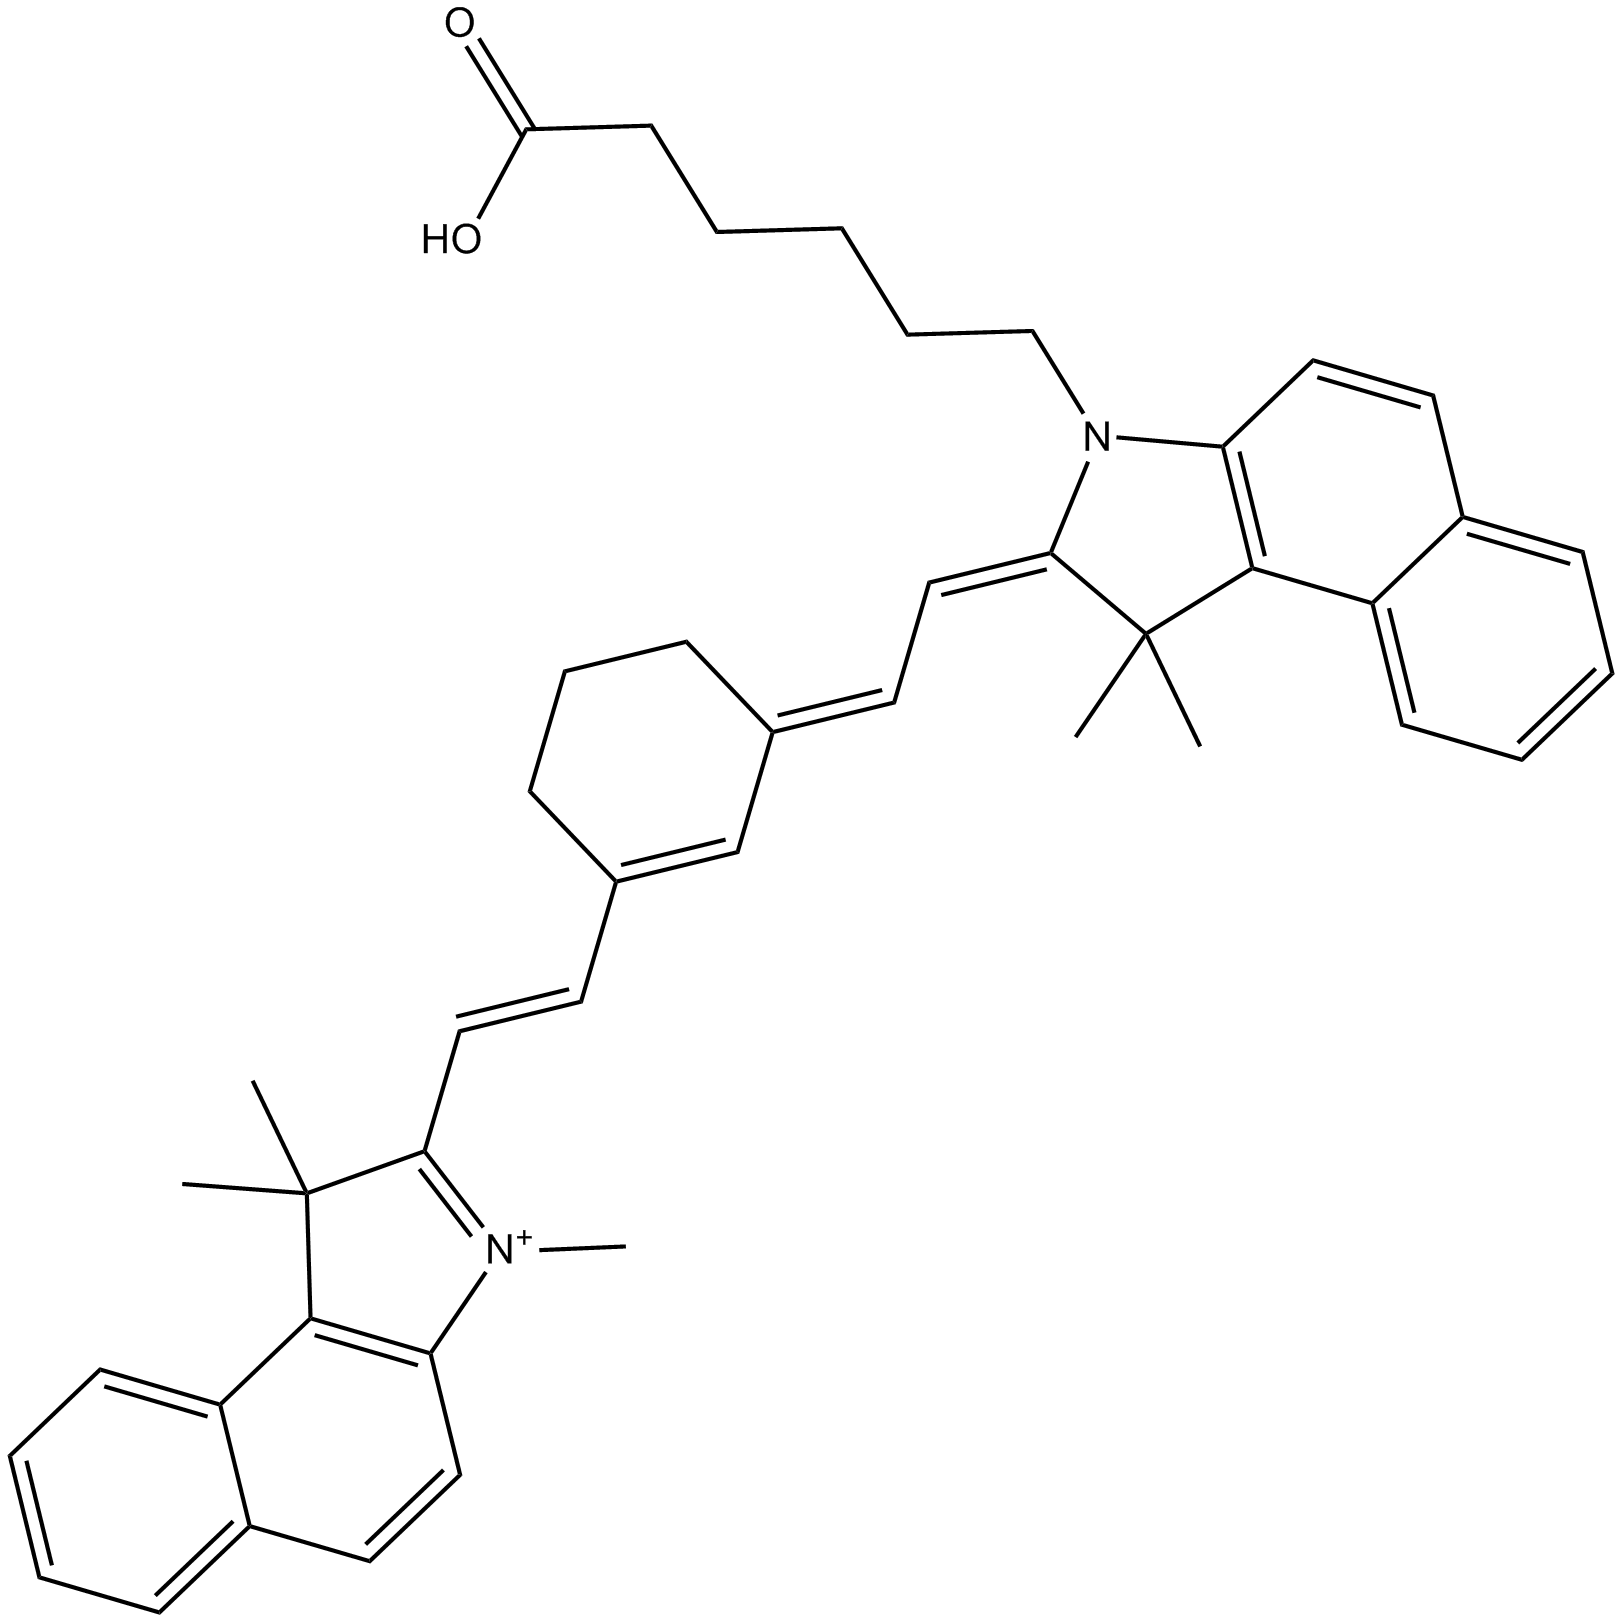 Cy7.5 carboxylic acid (non-sulfonated) 化学構造